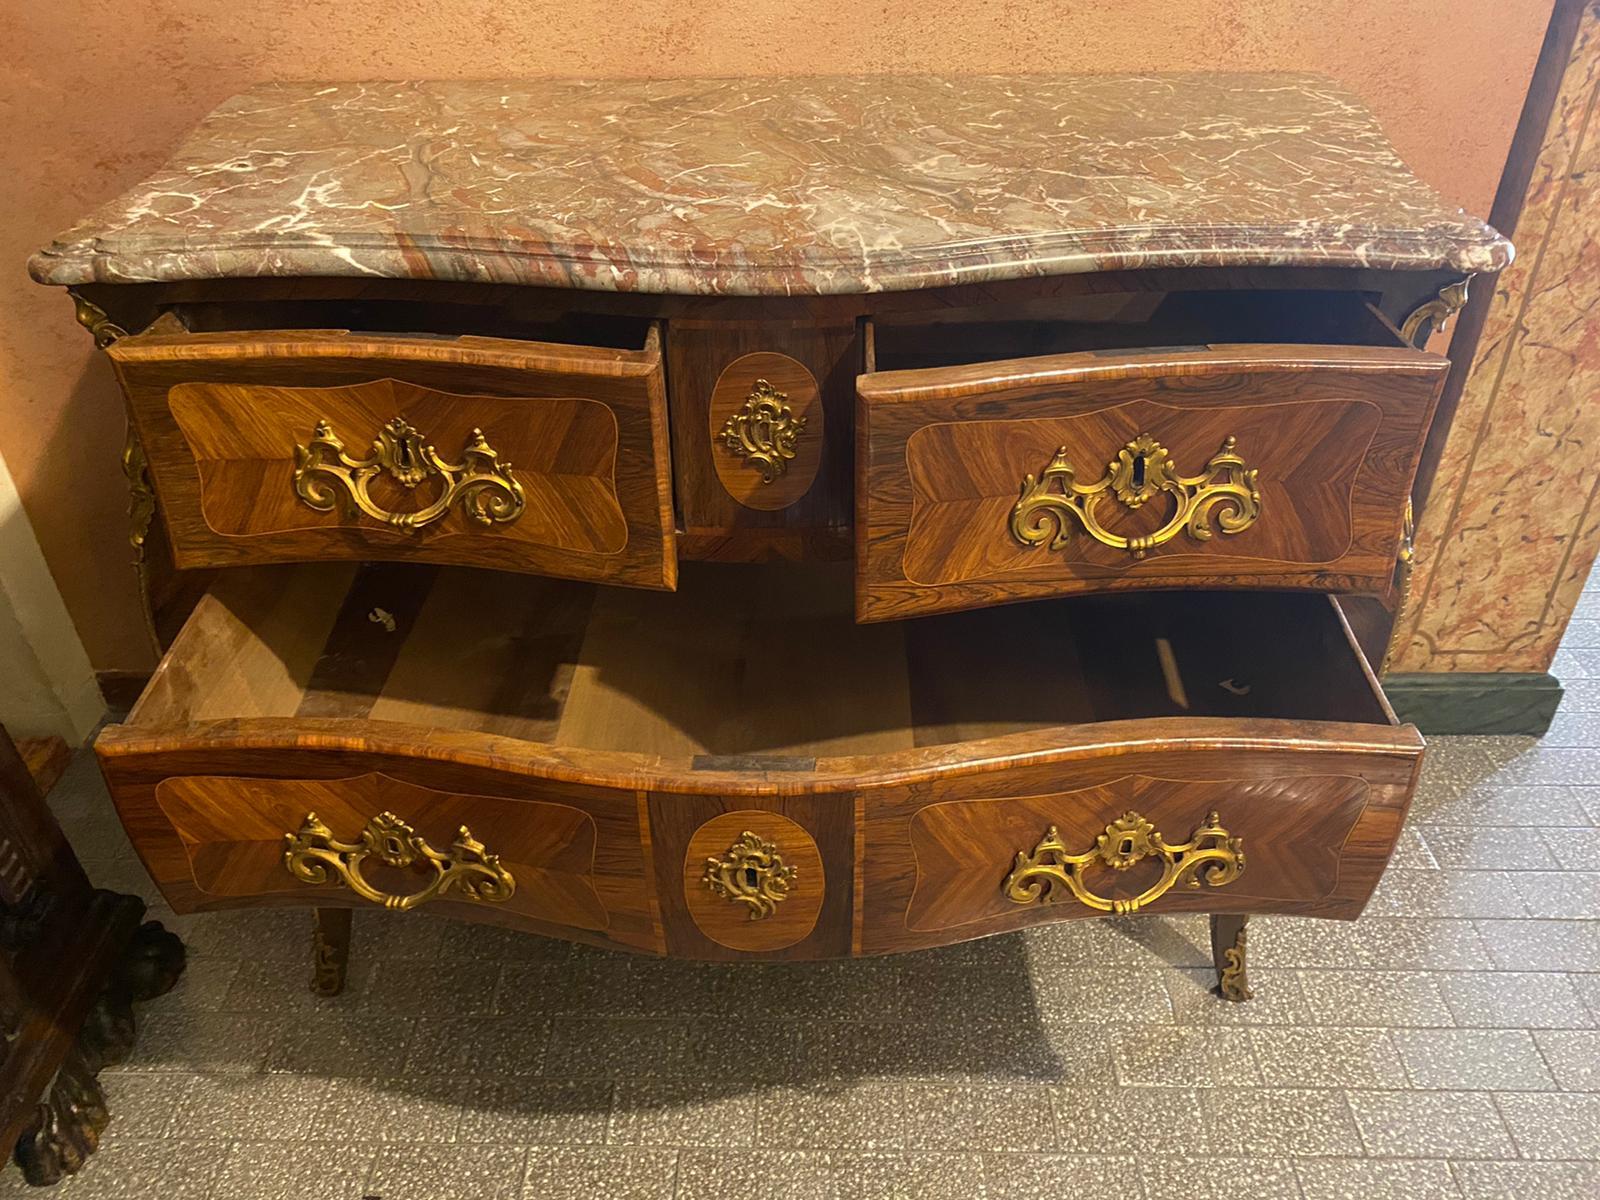 A fine French 18th century Louis XV commode by Leonard Boudin.
Chest of drawers in amaranth and rosewood veneer, with elaborate chiseled gilt bronze mounts, and serpentine shaped Breccia Aurora marble top.
Stamped on the left corner 